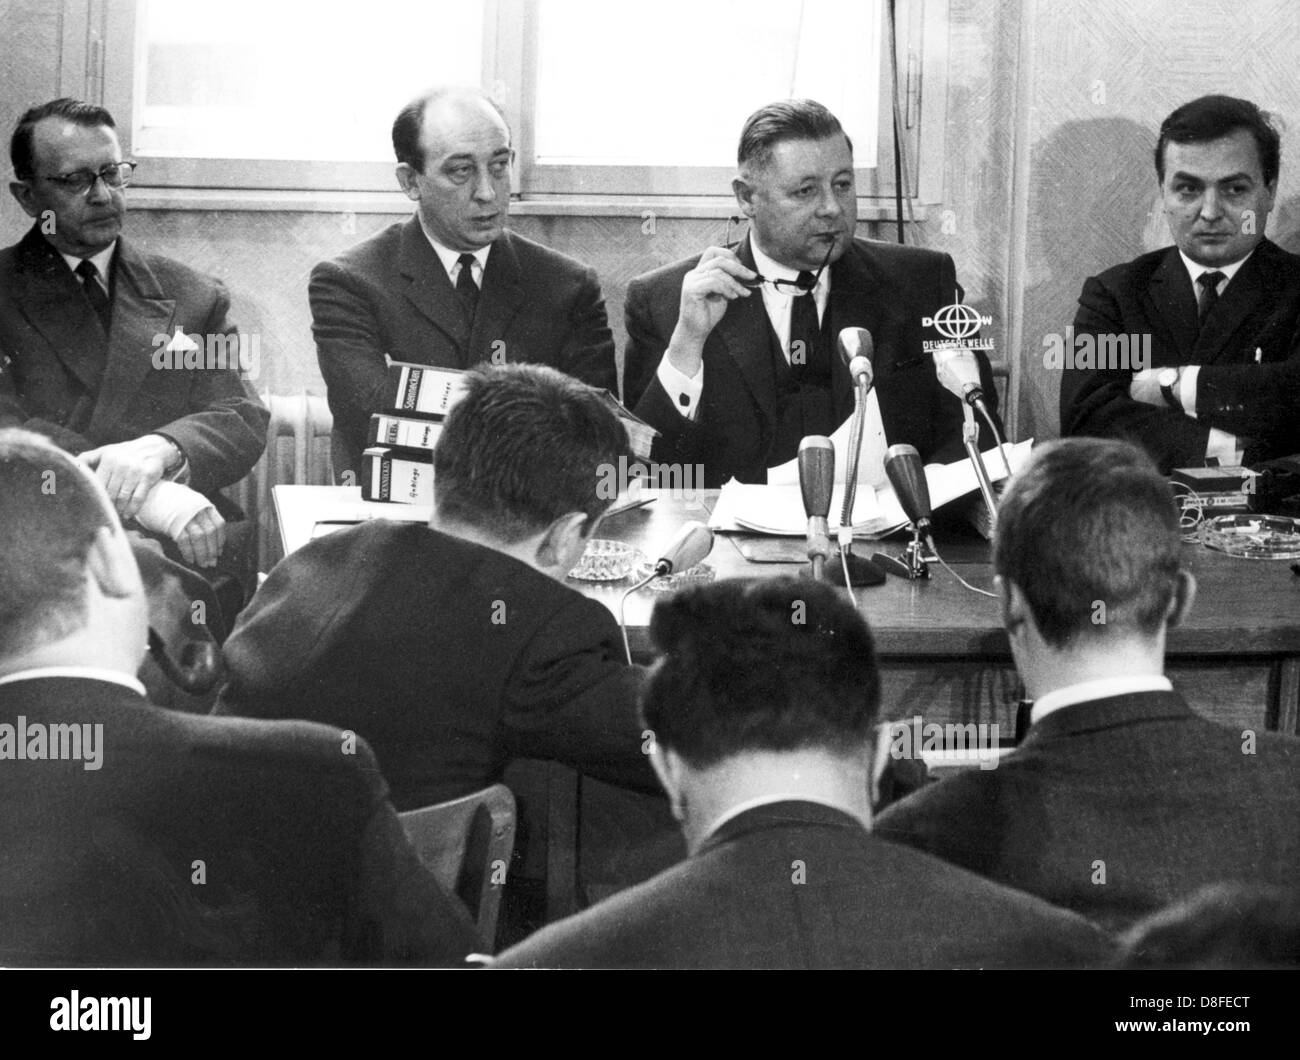 (L-r) Chief prosecutor Schue, prosecutor Havertzs, chief prosecturo Dr. Gierlich and prosecutor Knipfer during a press conference in Aachen on the 14th of March in 1967. The prosecution of Aachen has prefered the charge against nine employees of the Contergan manufacturing company Grünenthal. About 8,000 to 12,000 children were born with severe malformations, many died, due to the intake of the sleeping pill Contergang during pregnancy. The process was closed without a judgement. The company Grünenthal voluntarily paid 114 million Mark of compensation to the victims. Stock Photo